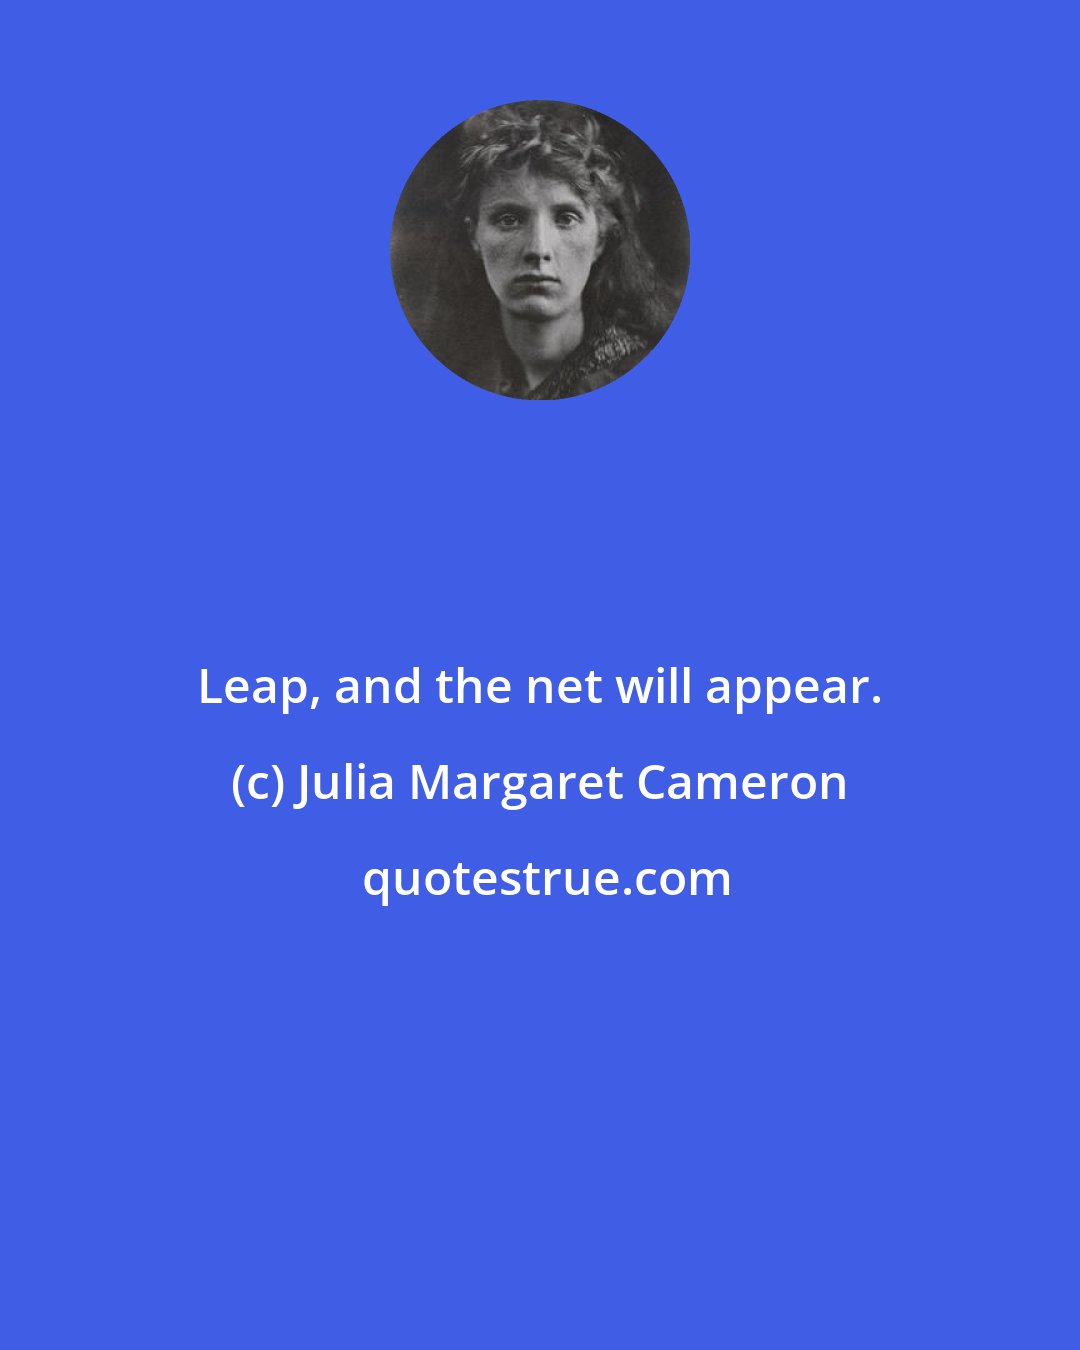 Julia Margaret Cameron: Leap, and the net will appear.